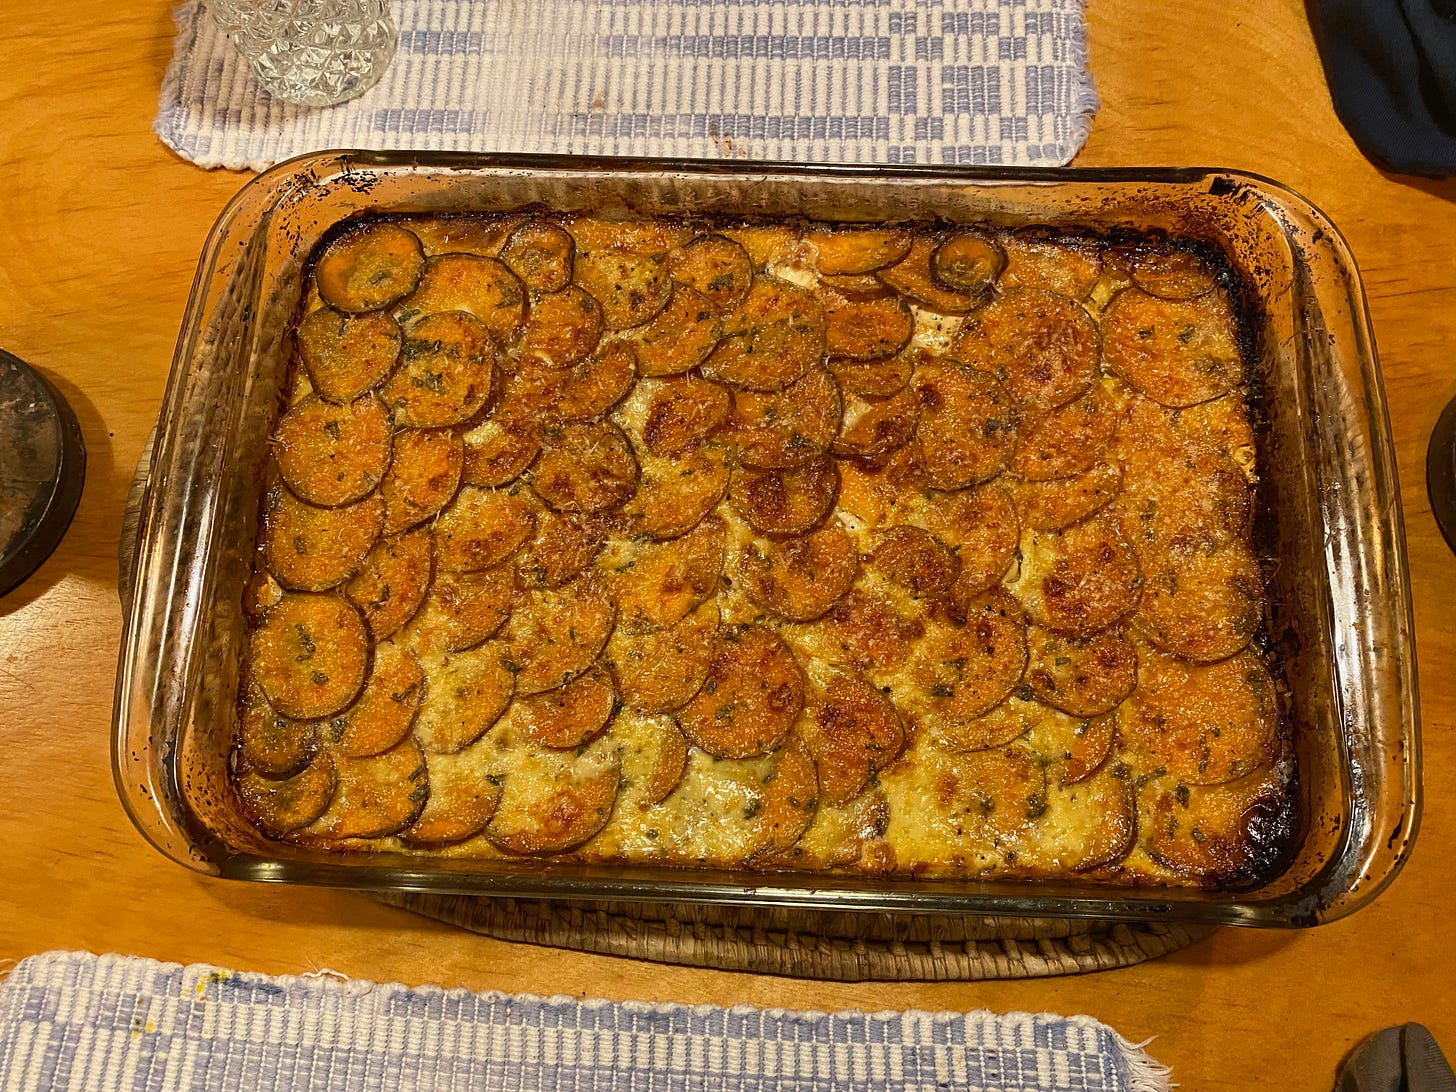 A sweet potato casserole, golden brown and bubbling, in a glass baking dish on a dinning room table.